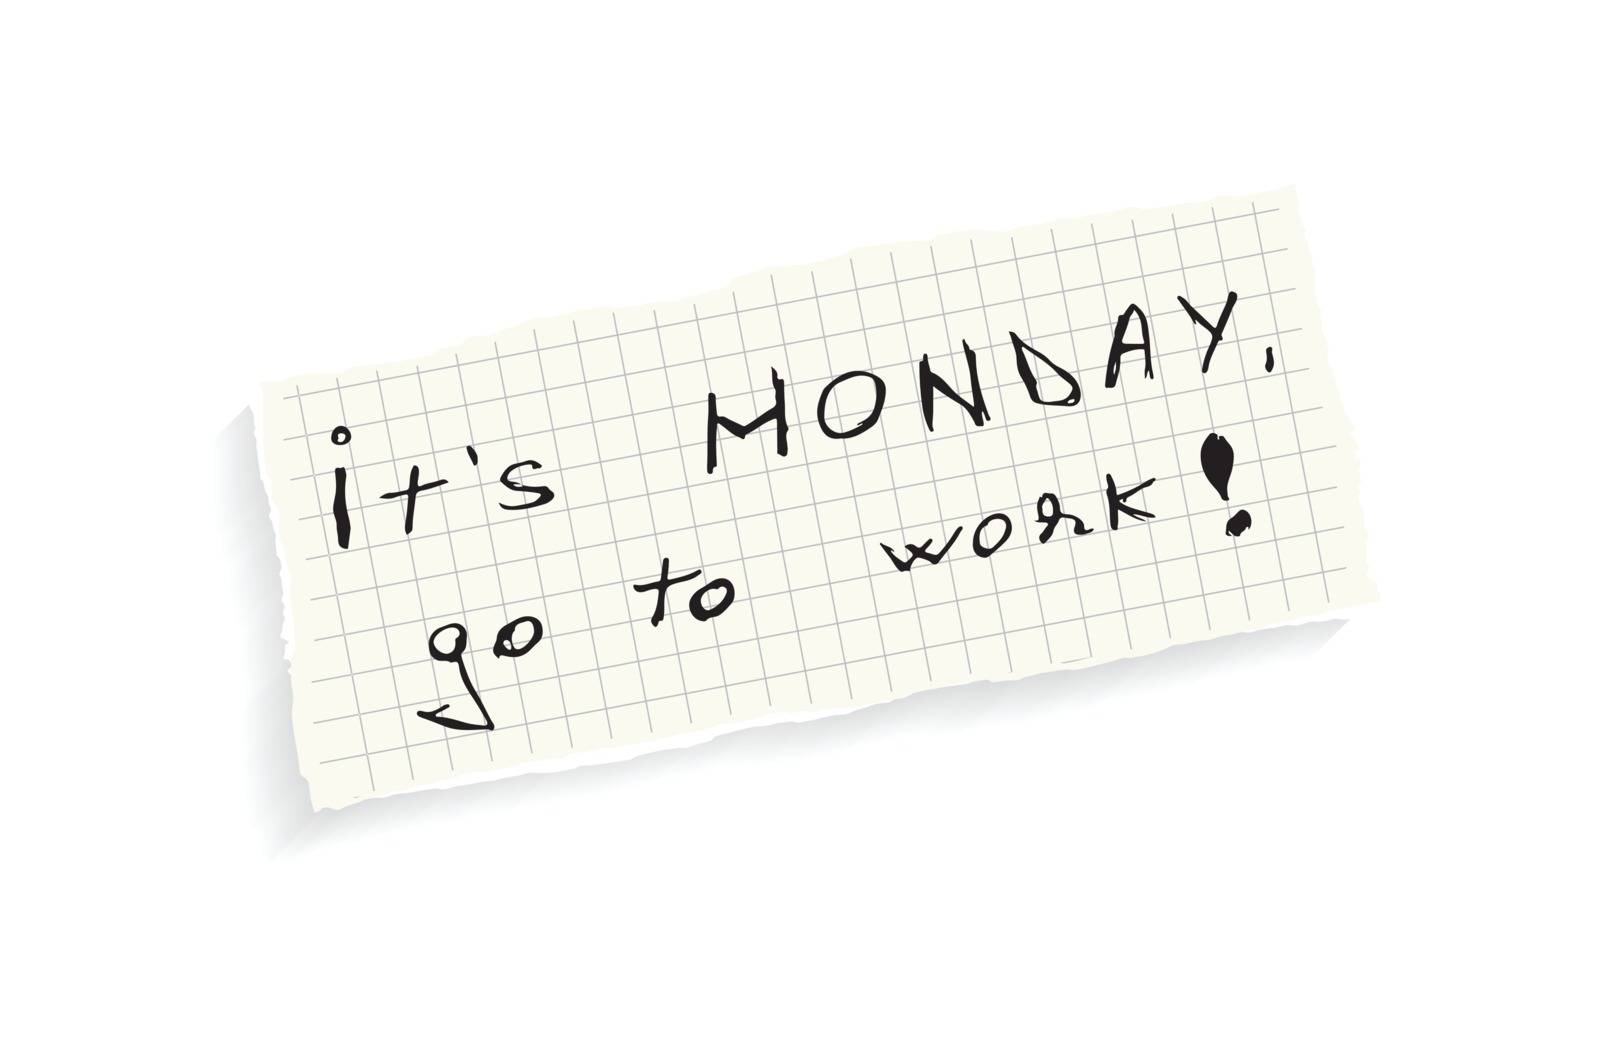 It's Monday, go to work! Hand writing text on a piece of math paper isolated on a white background.